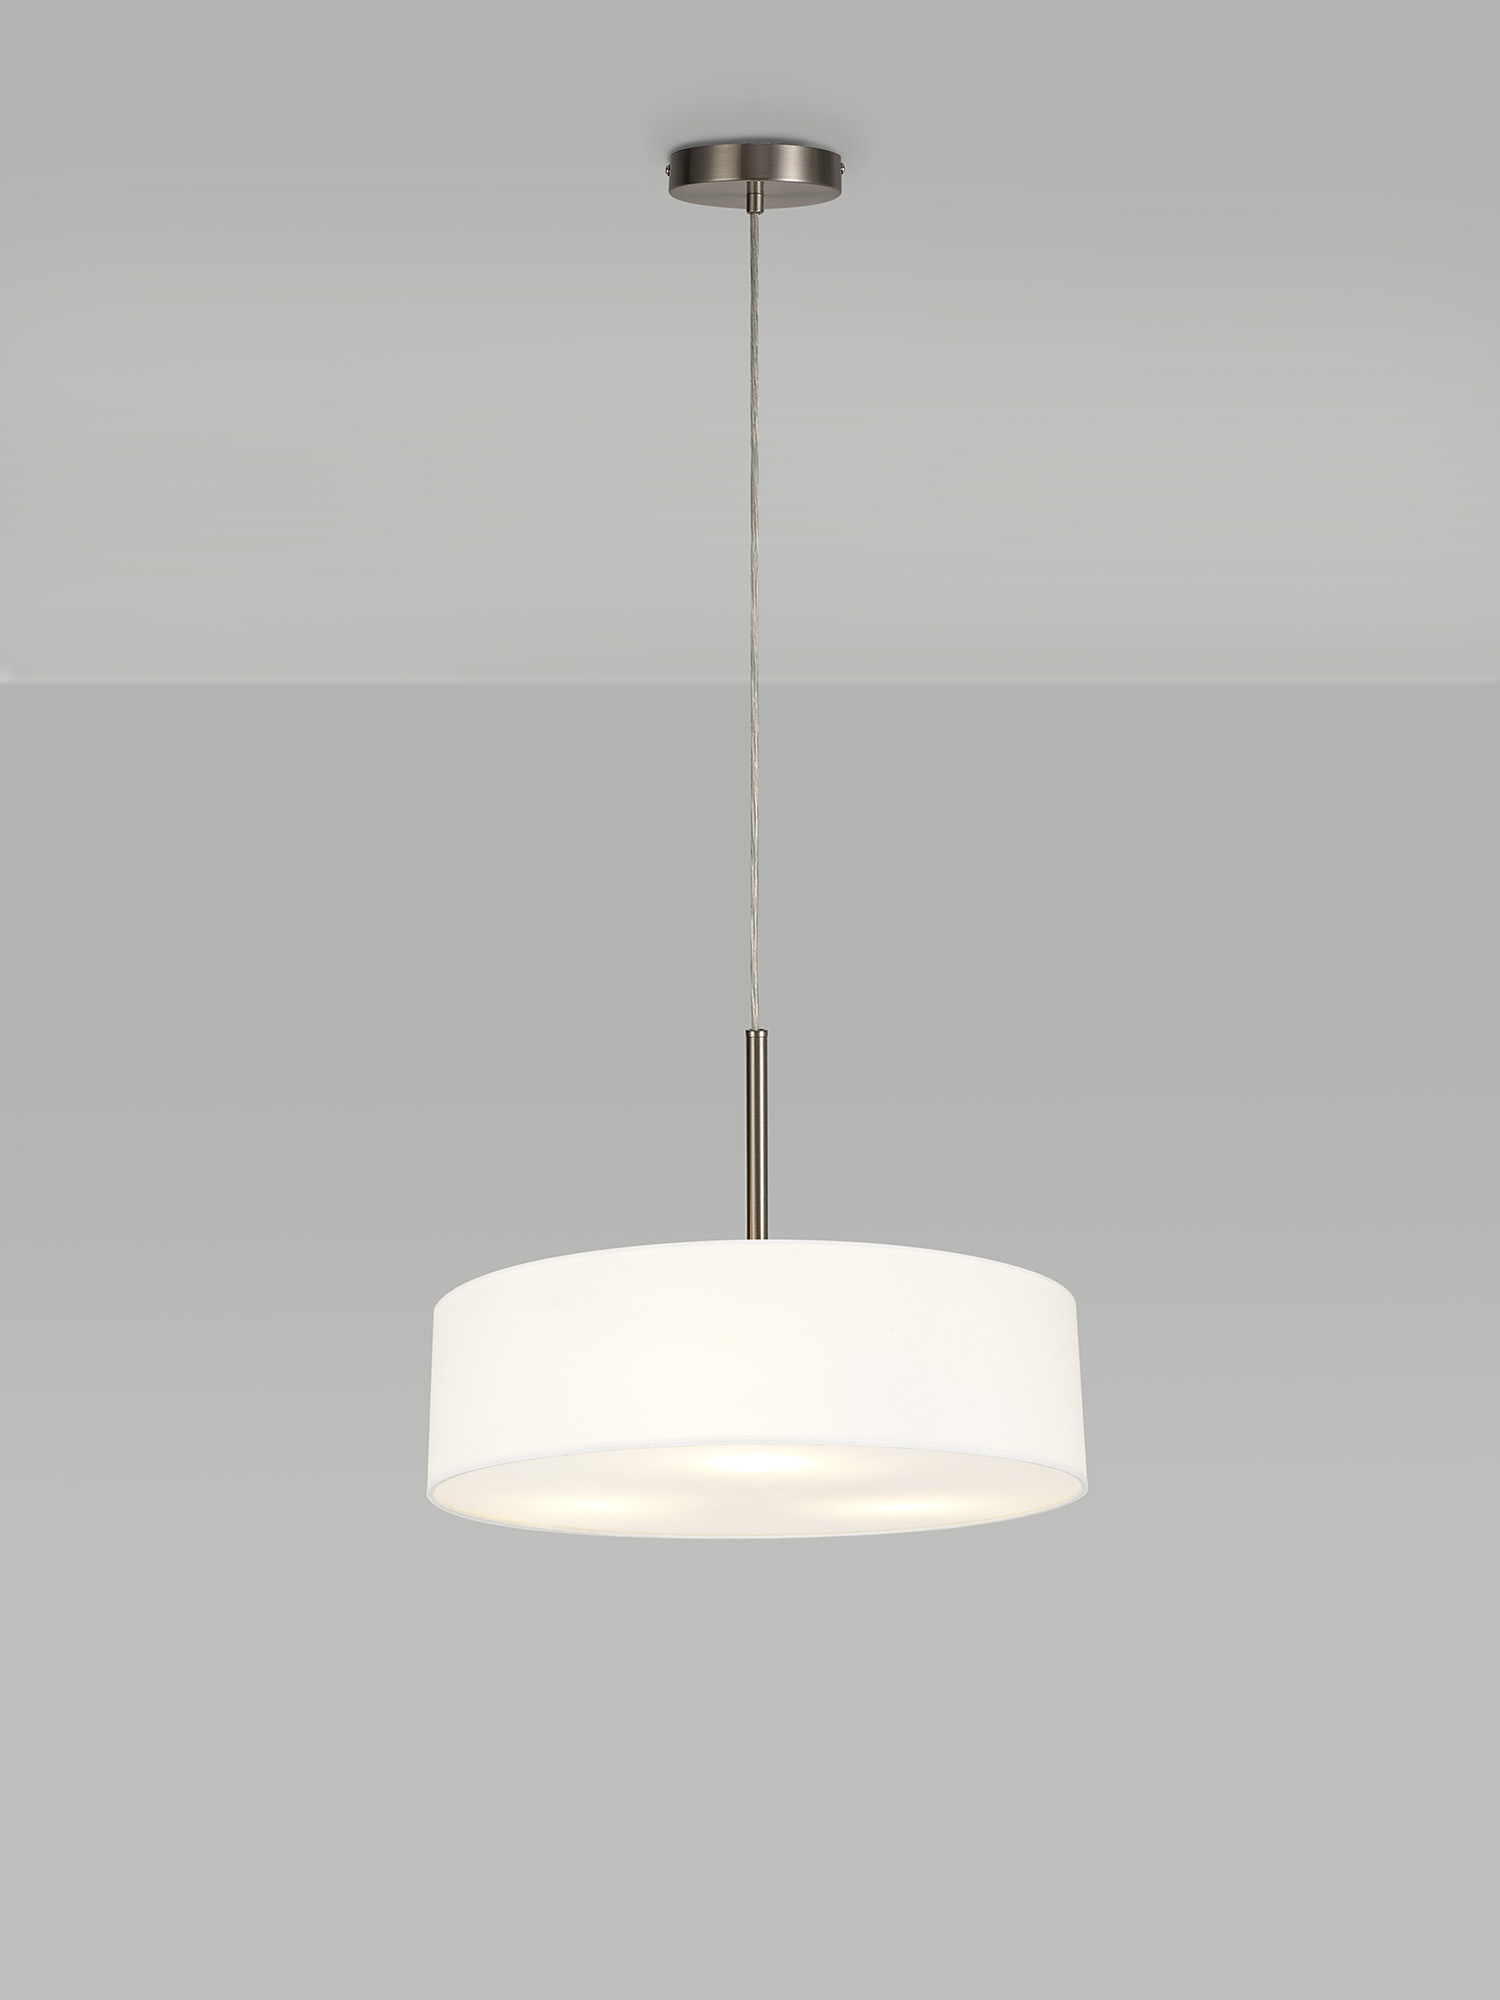 Baymont SN WH Ceiling Lights Deco Contemporary Ceiling Lights